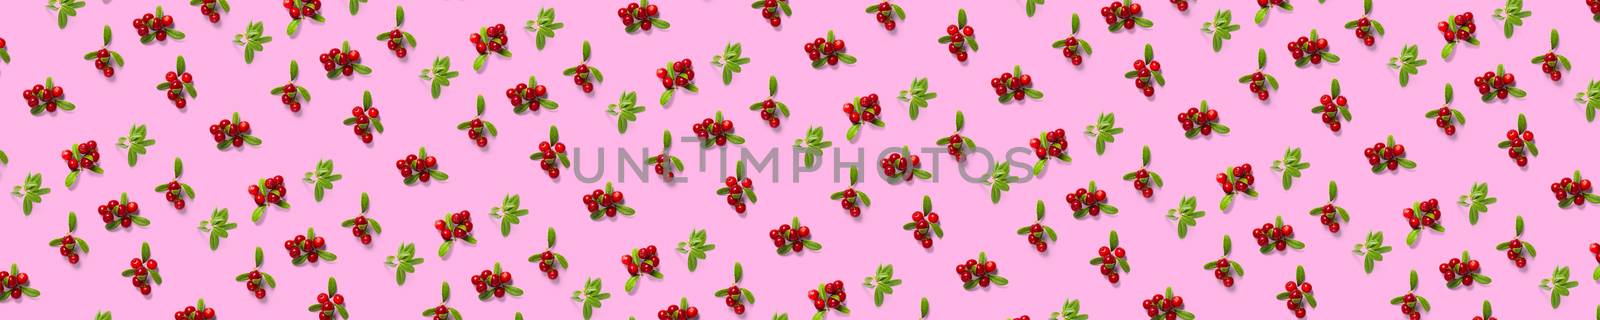 Lingonberry background on pink backdrop. Fresh cowberries or cranberries with leaves as background by PhotoTime